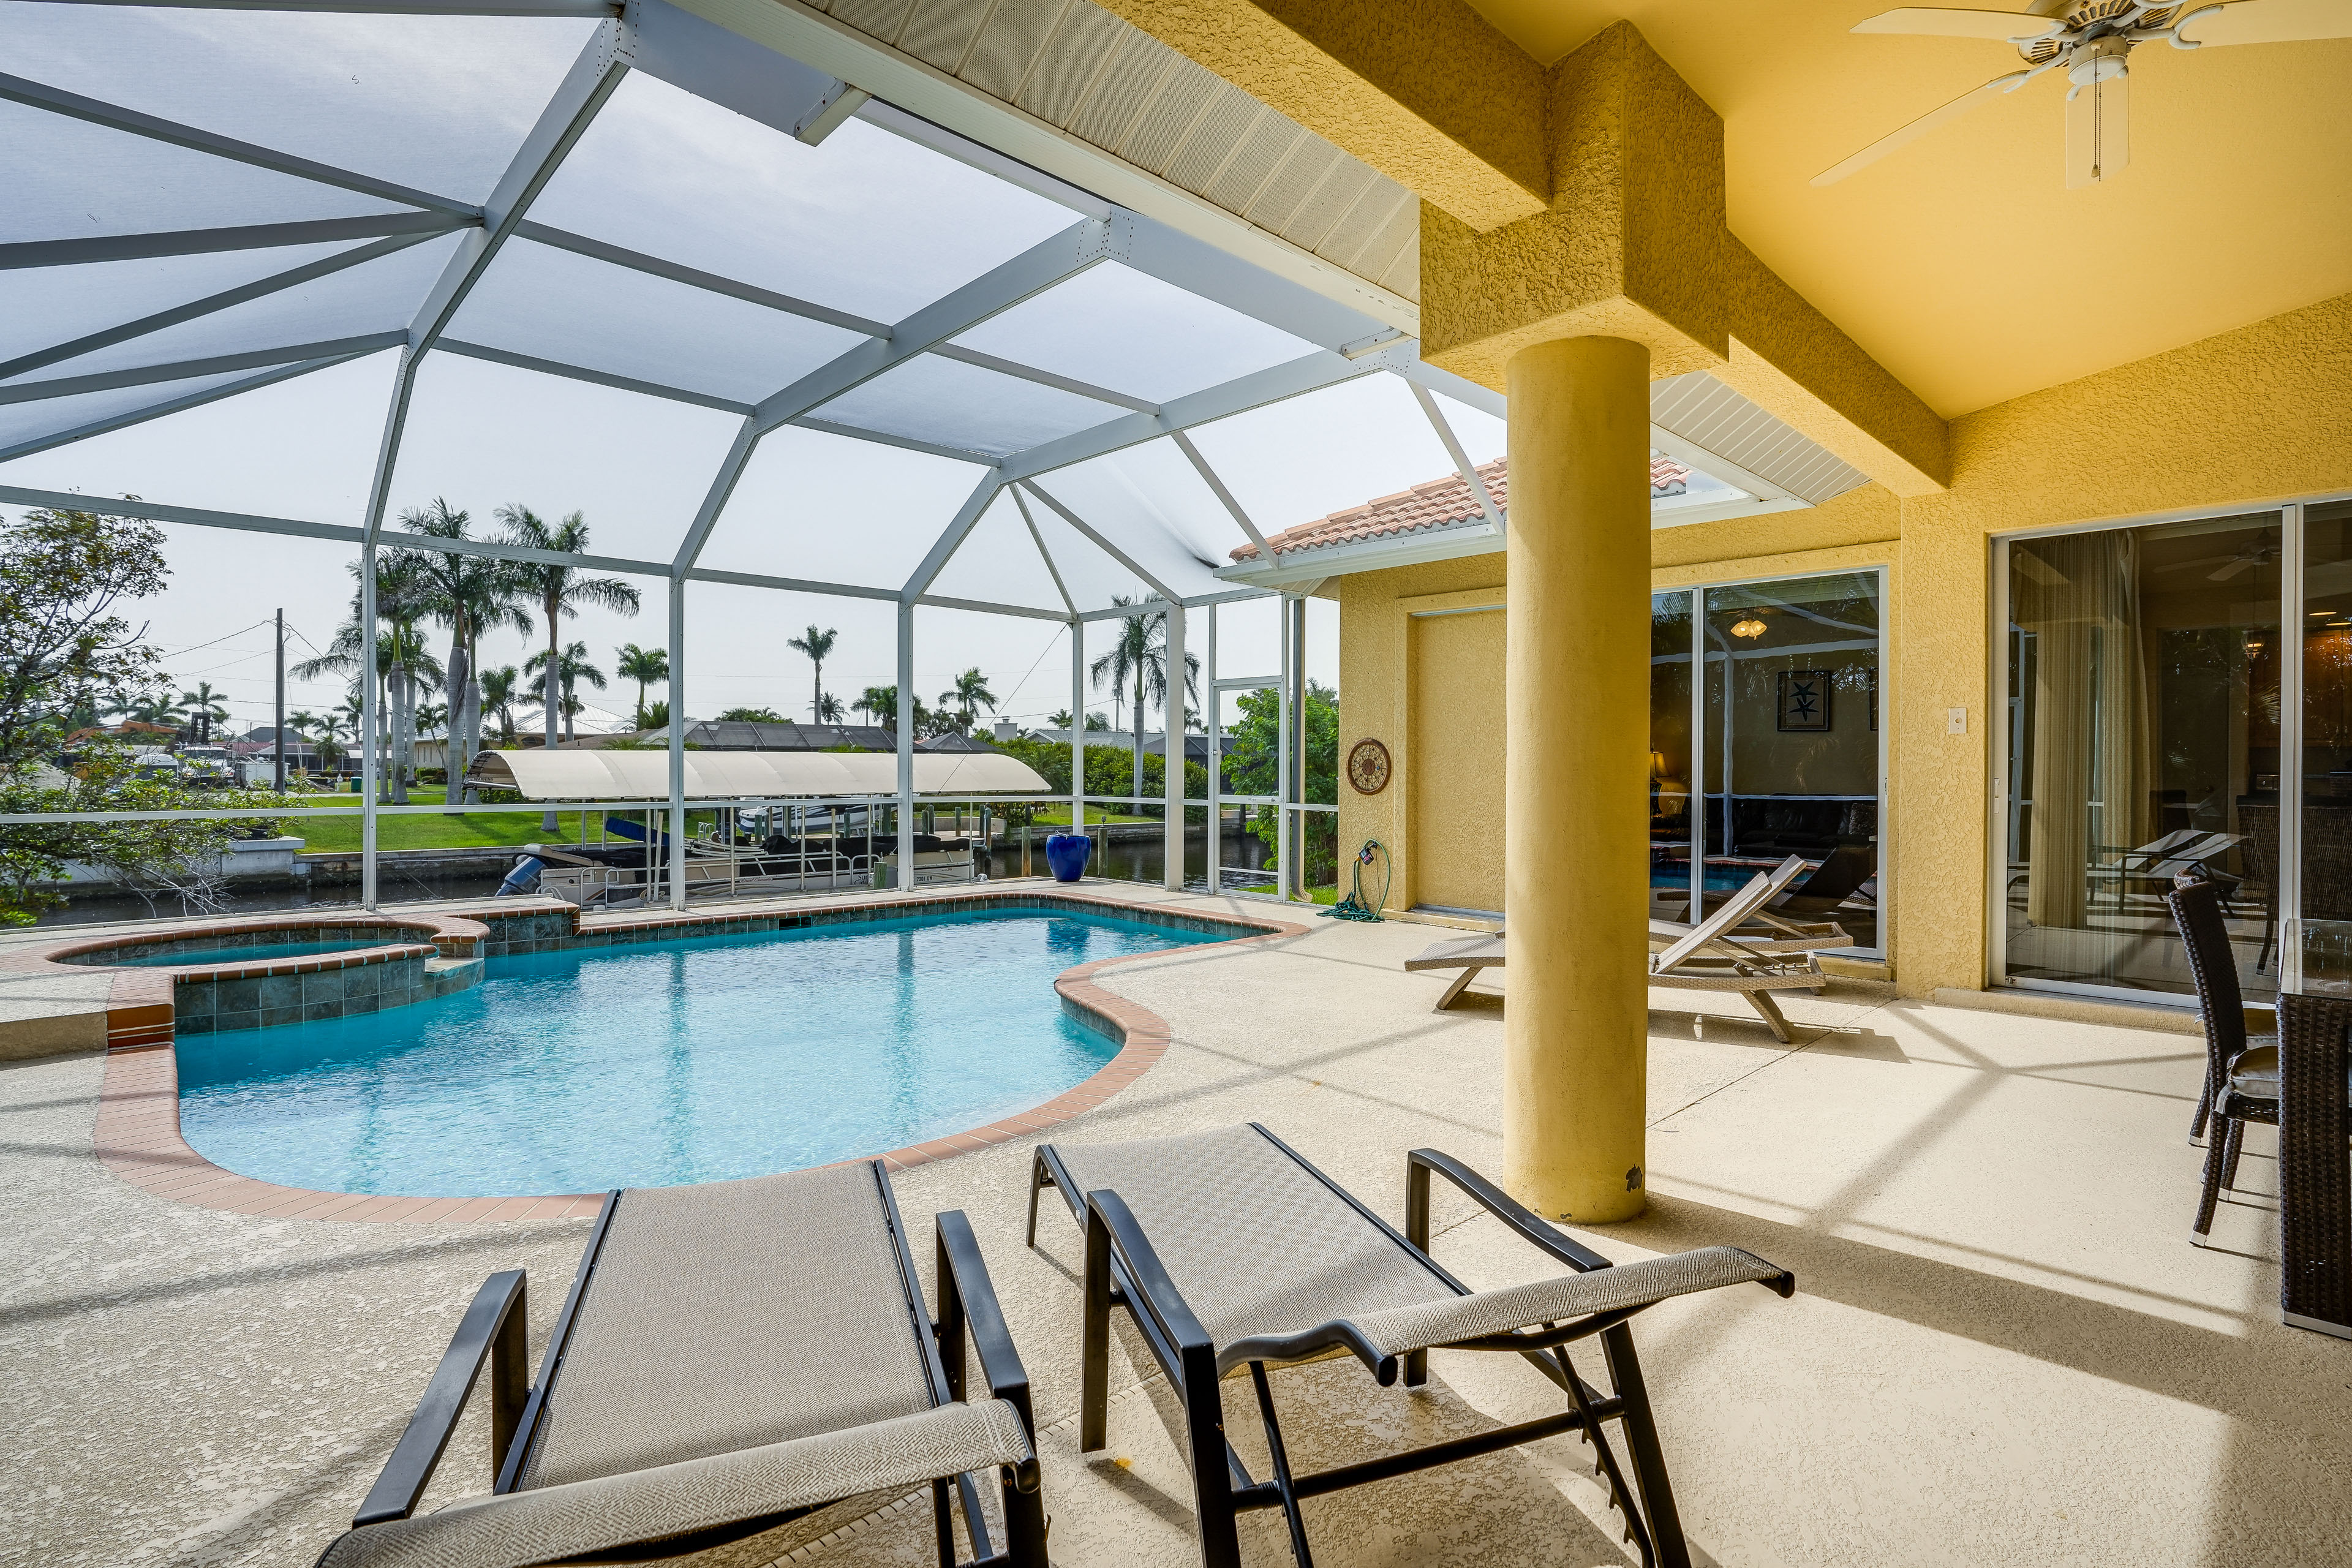 Property Image 1 - Waterfront Cape Coral Home: Lanai, Pool & Dock!